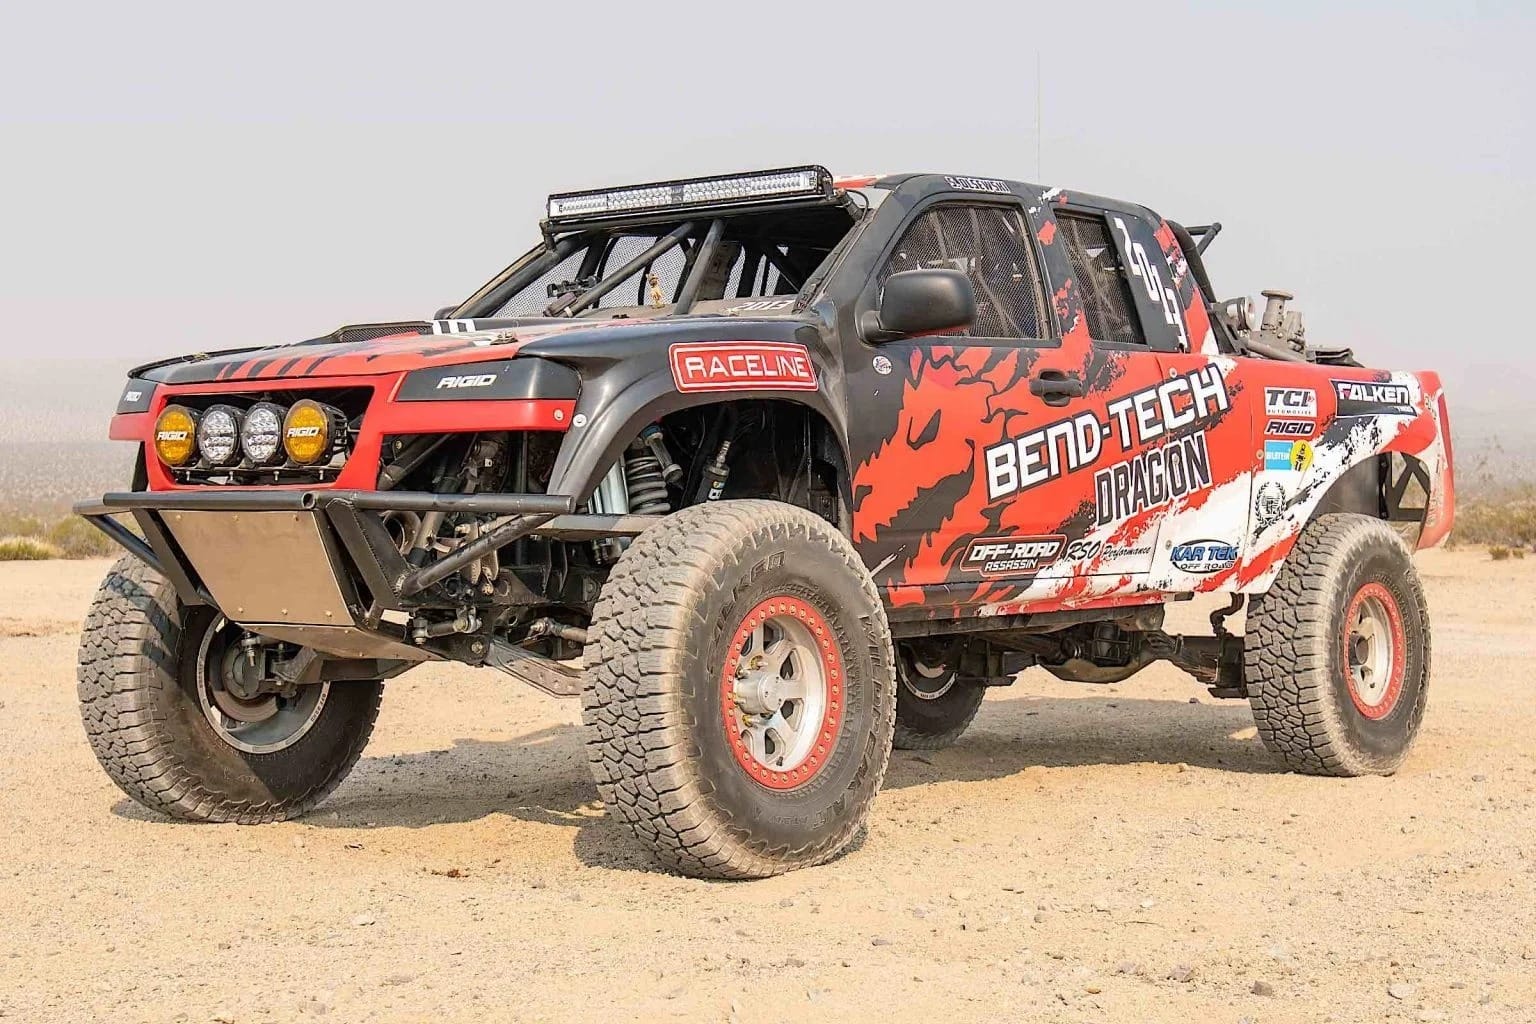 An off-road racing truck in the desert.